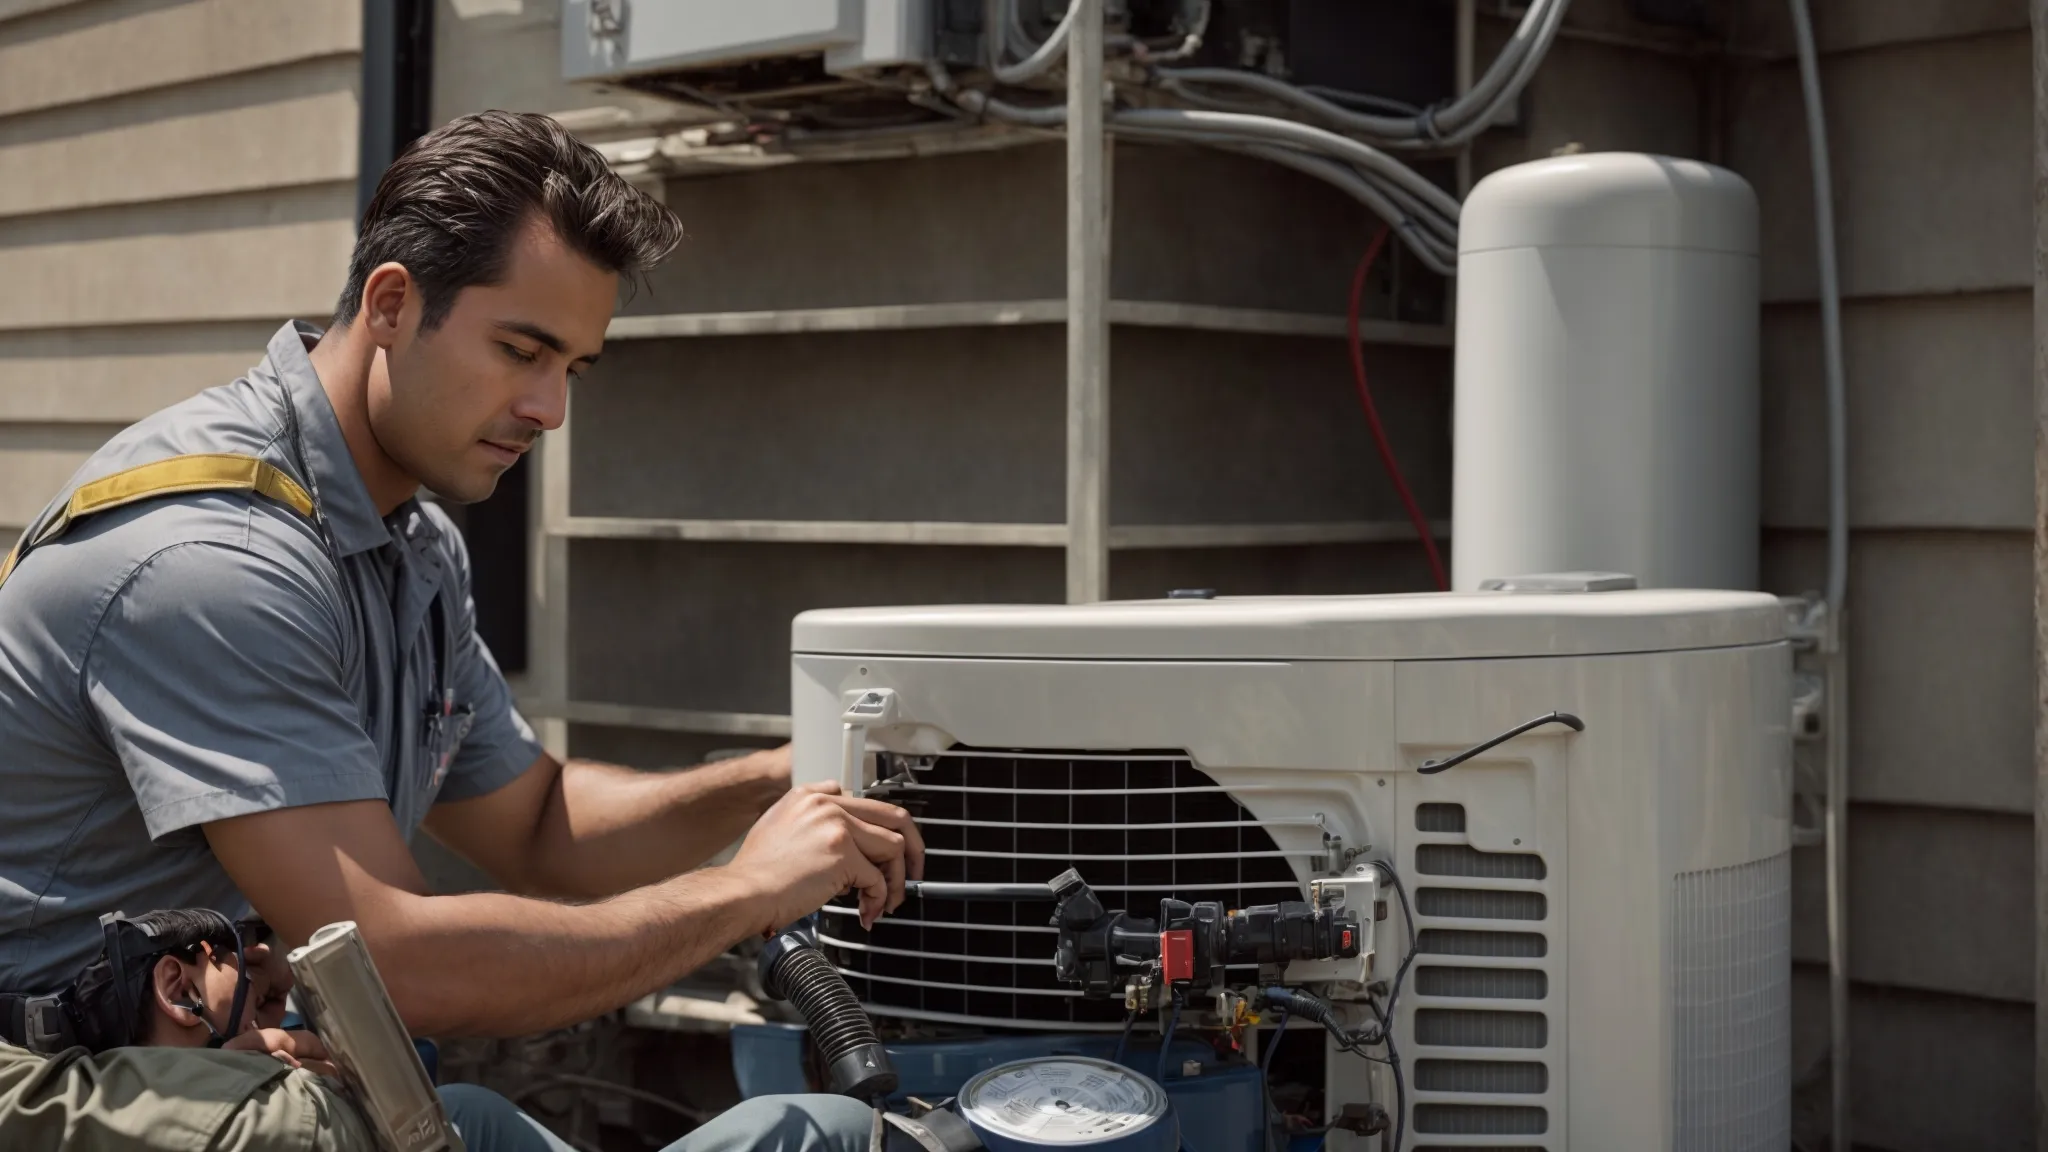 a professional hvac technician servicing a home air conditioning unit, symbolizing local service visibility.